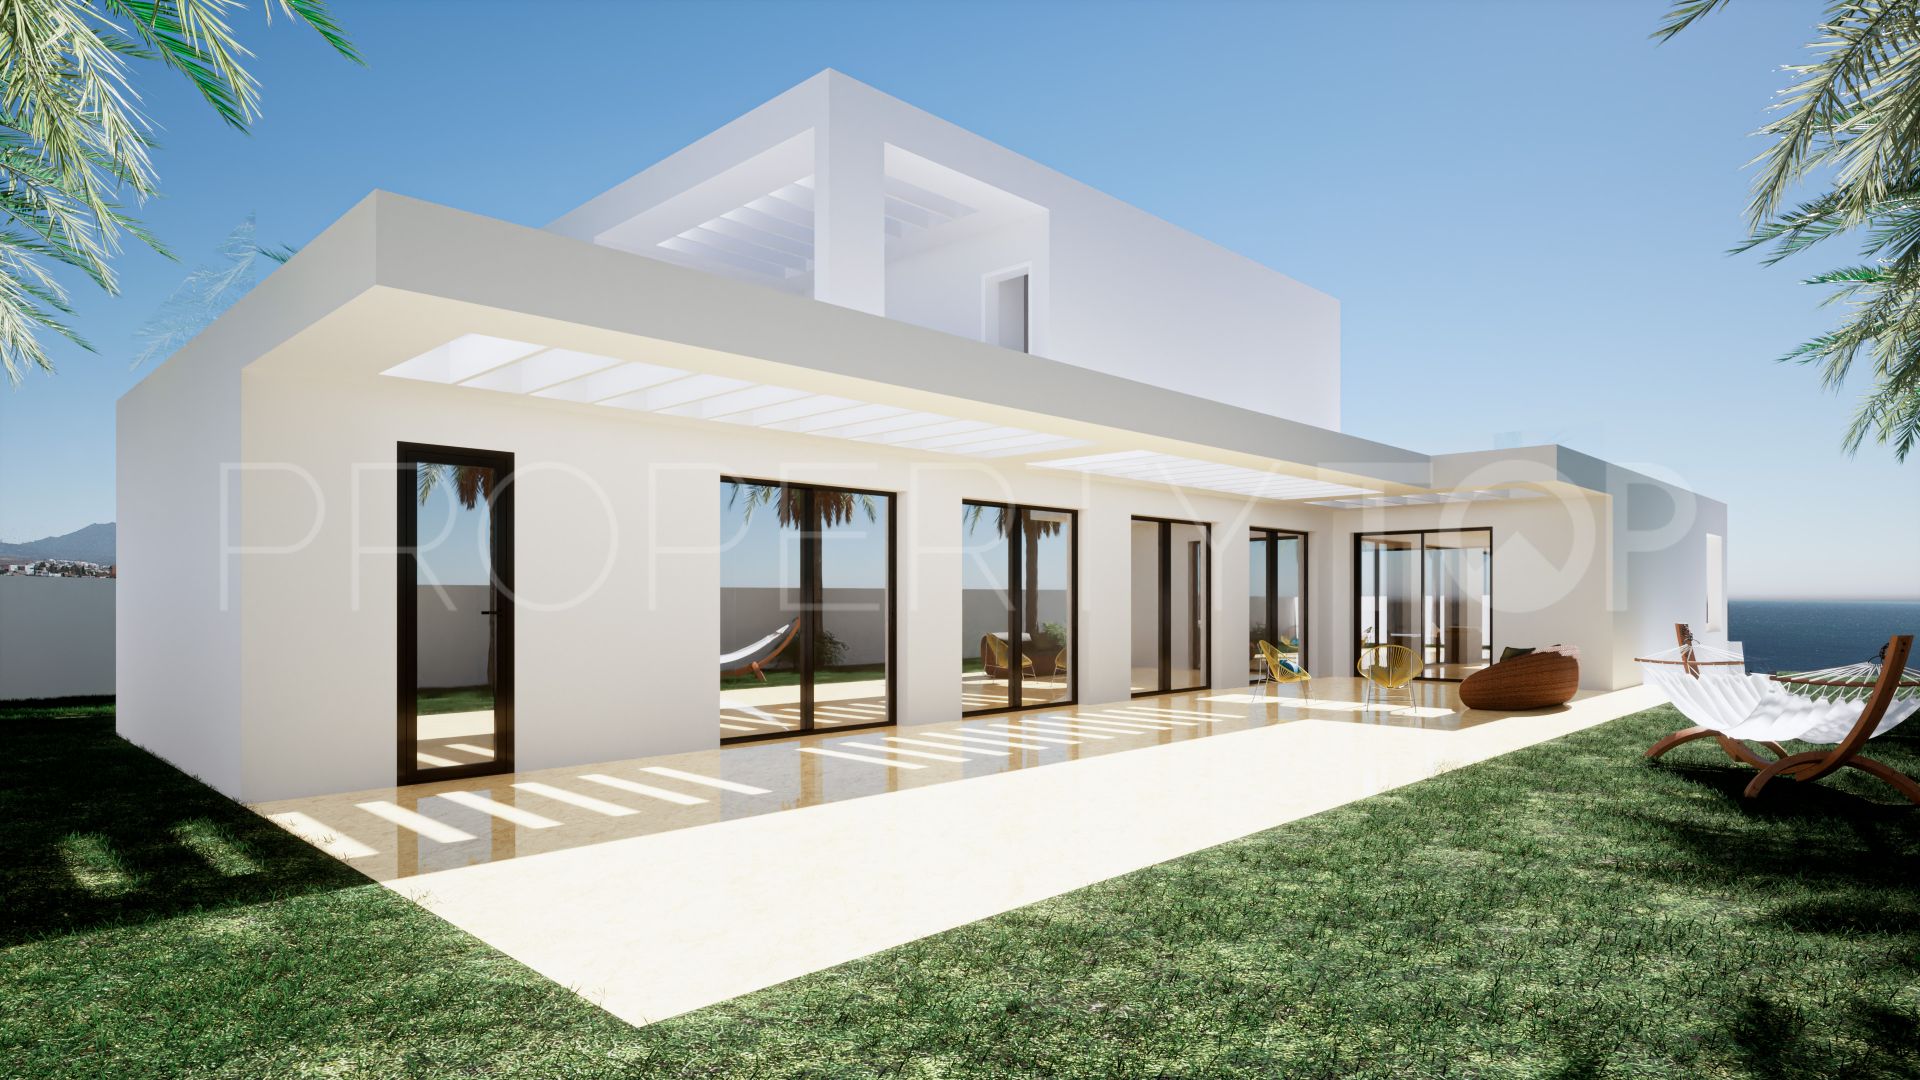 For sale villa in Majestic with 4 bedrooms